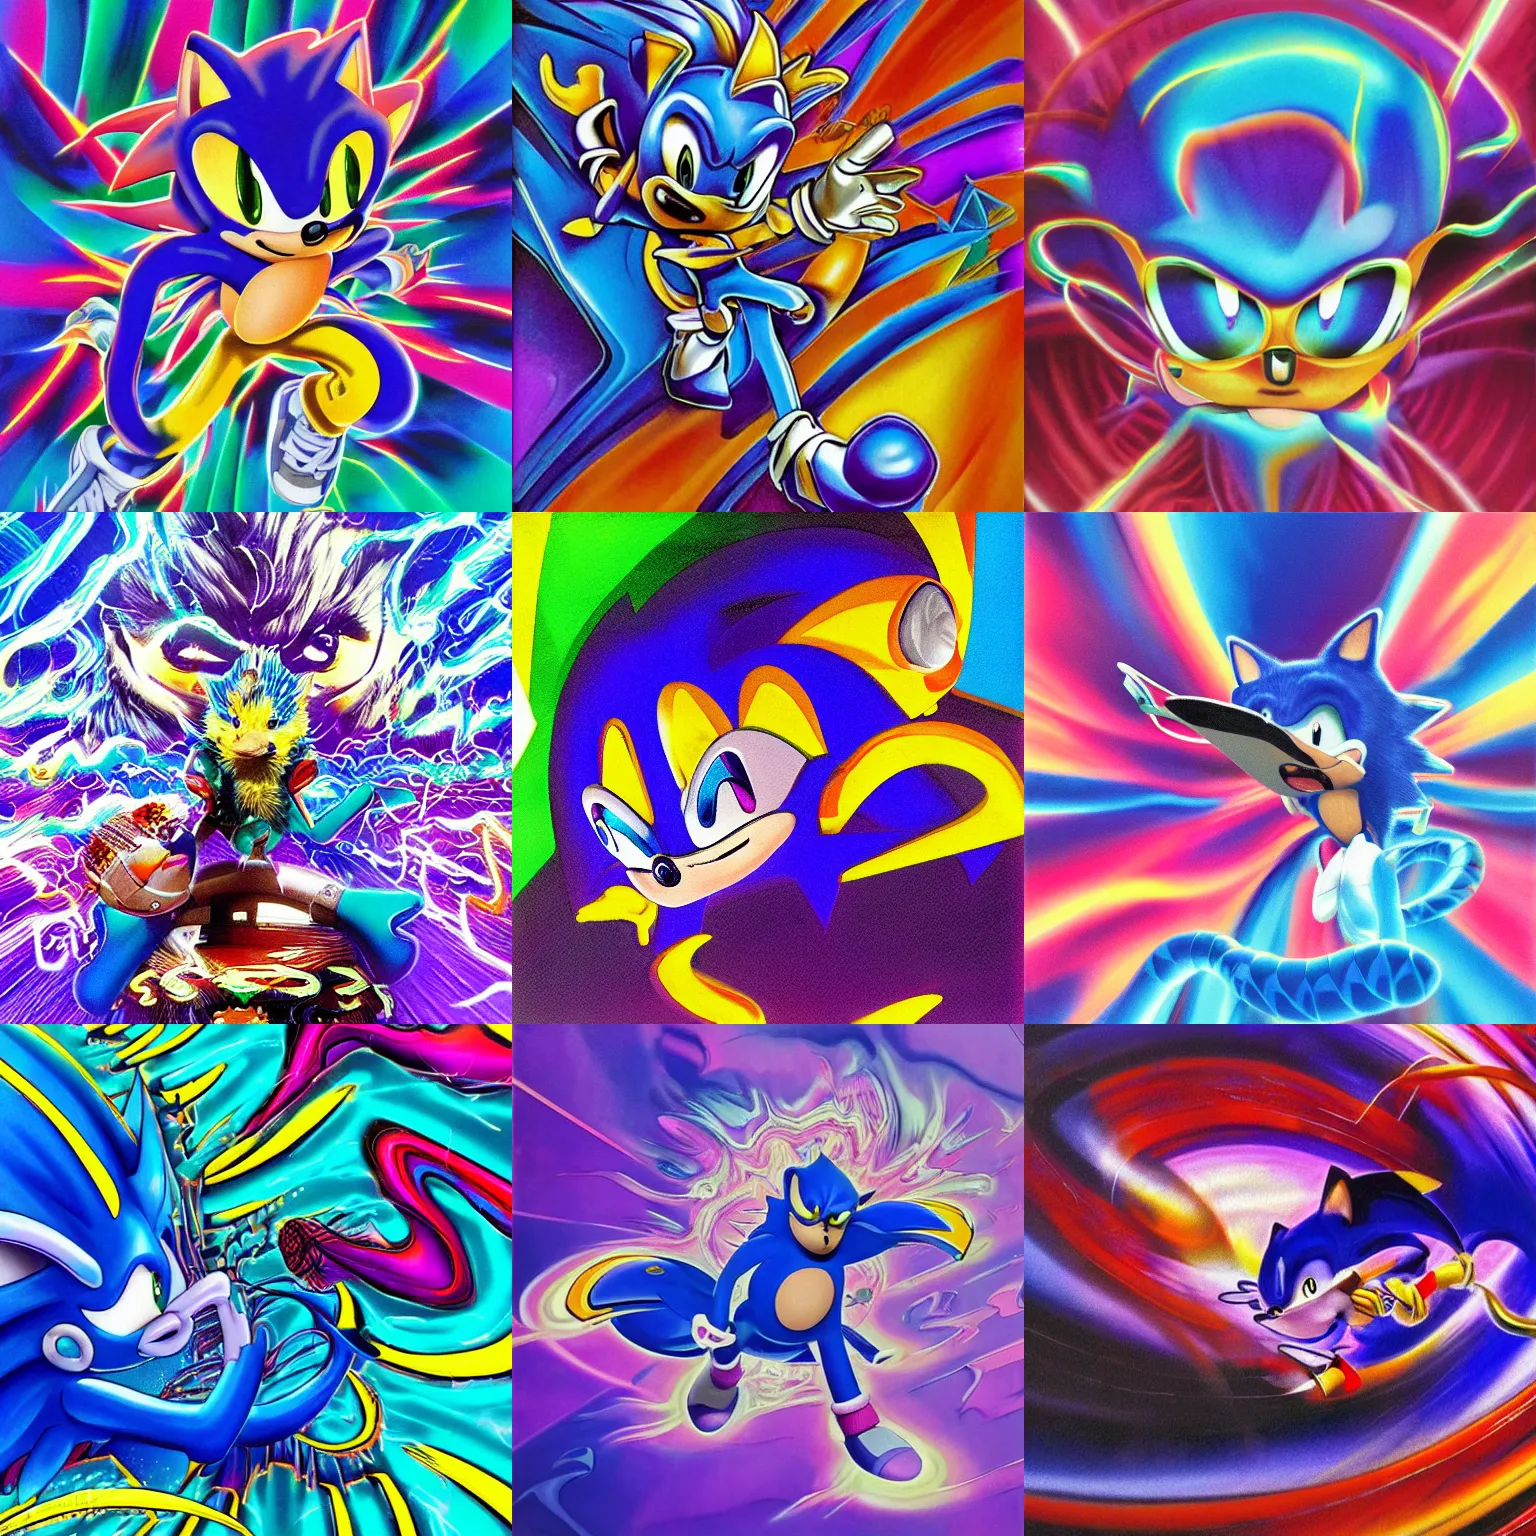 Prompt: surreal, sharp, detailed professional, high quality portrait sonic airbrush art MGMT album cover portrait of a liquid dissolving LSD DMT blue sonic the hedgehog surfing through cyberspace, purple checkerboard background, 1990s 1992 Sega Genesis video game album cover